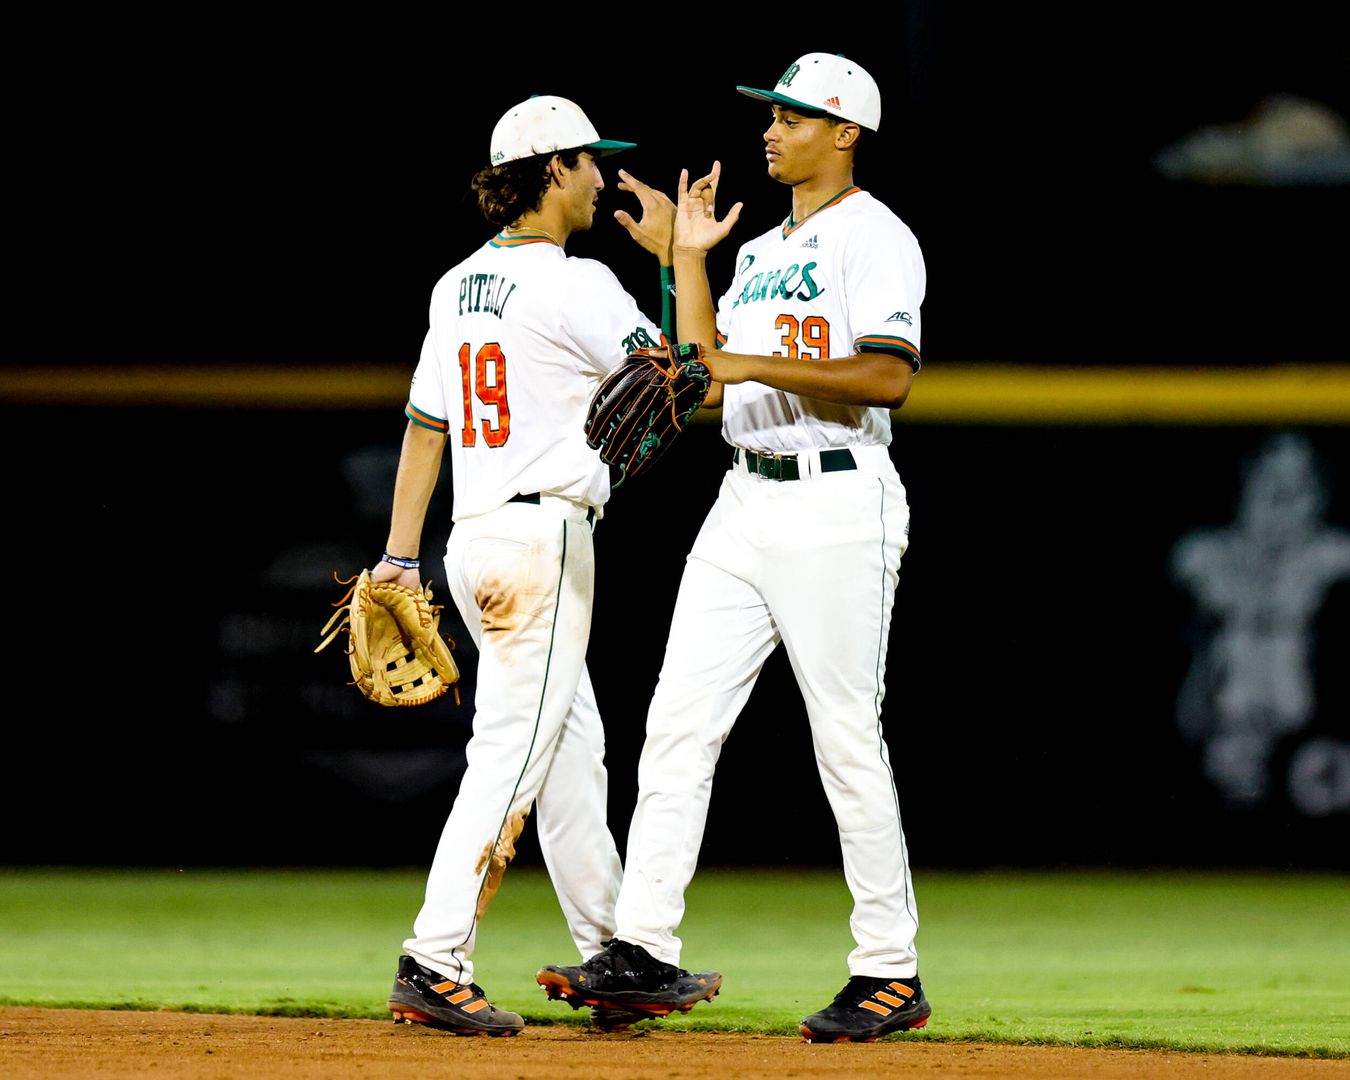 Hurricanes Ranked No. 9 by Perfect Game